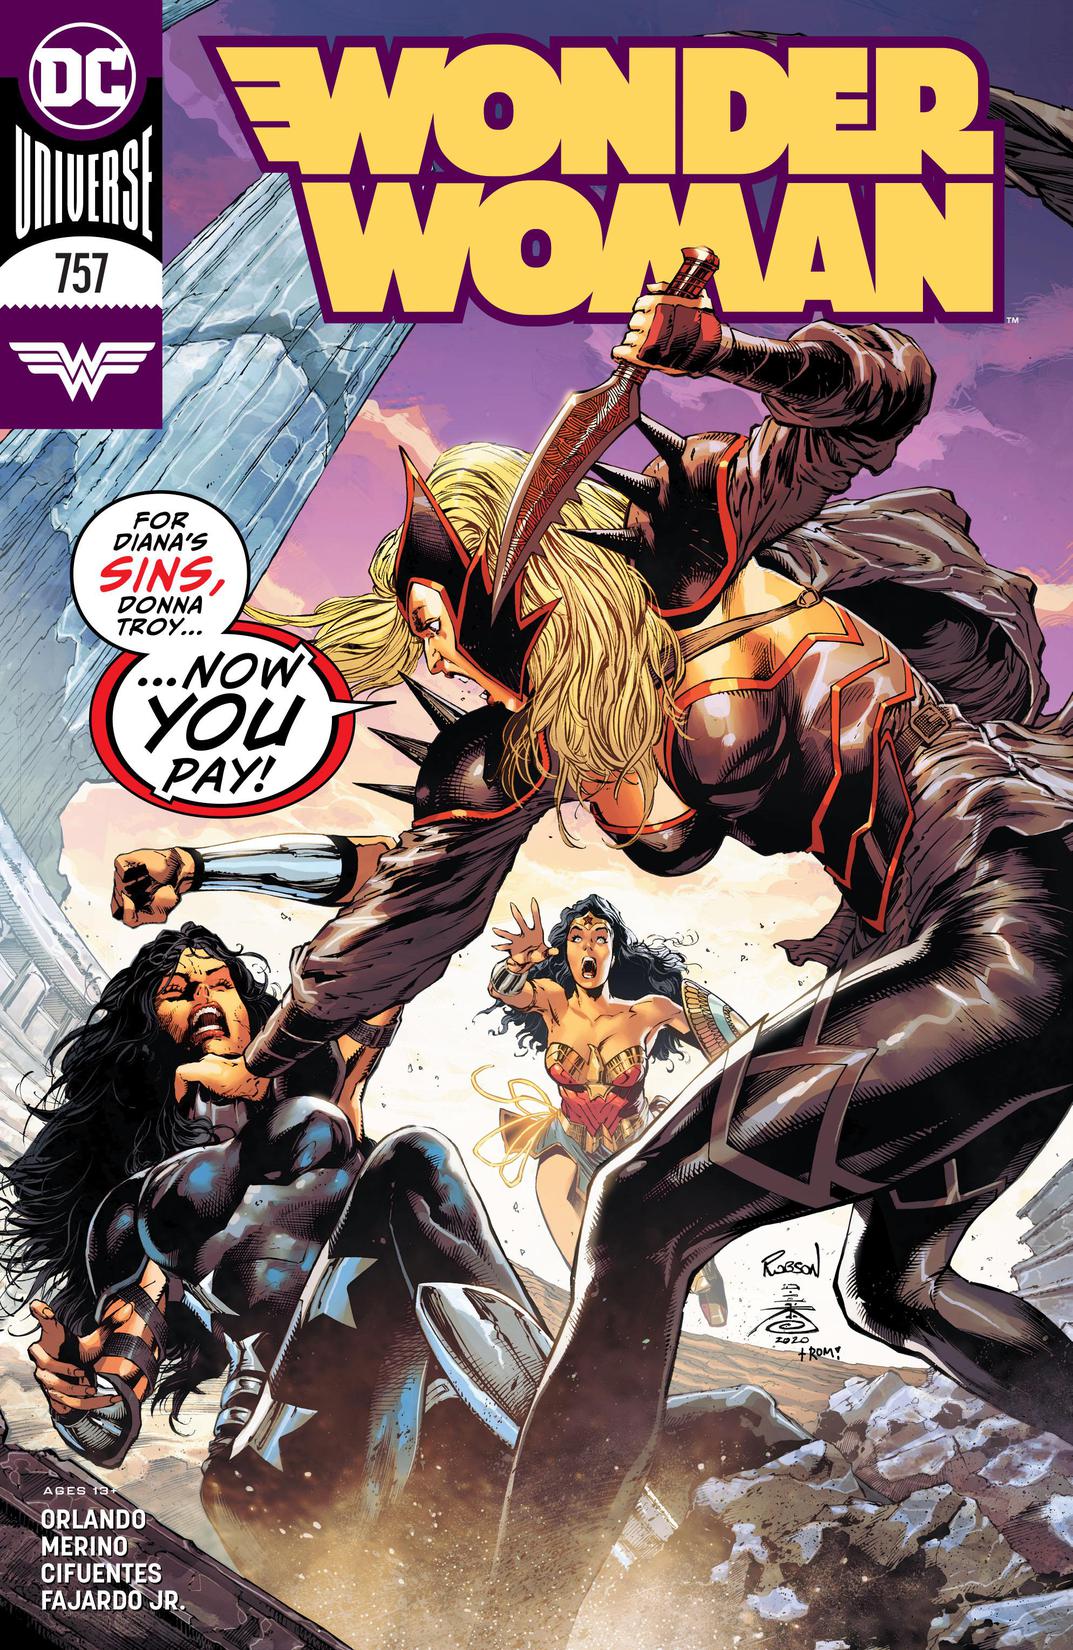 Wonder Woman (2016-) #757 preview images